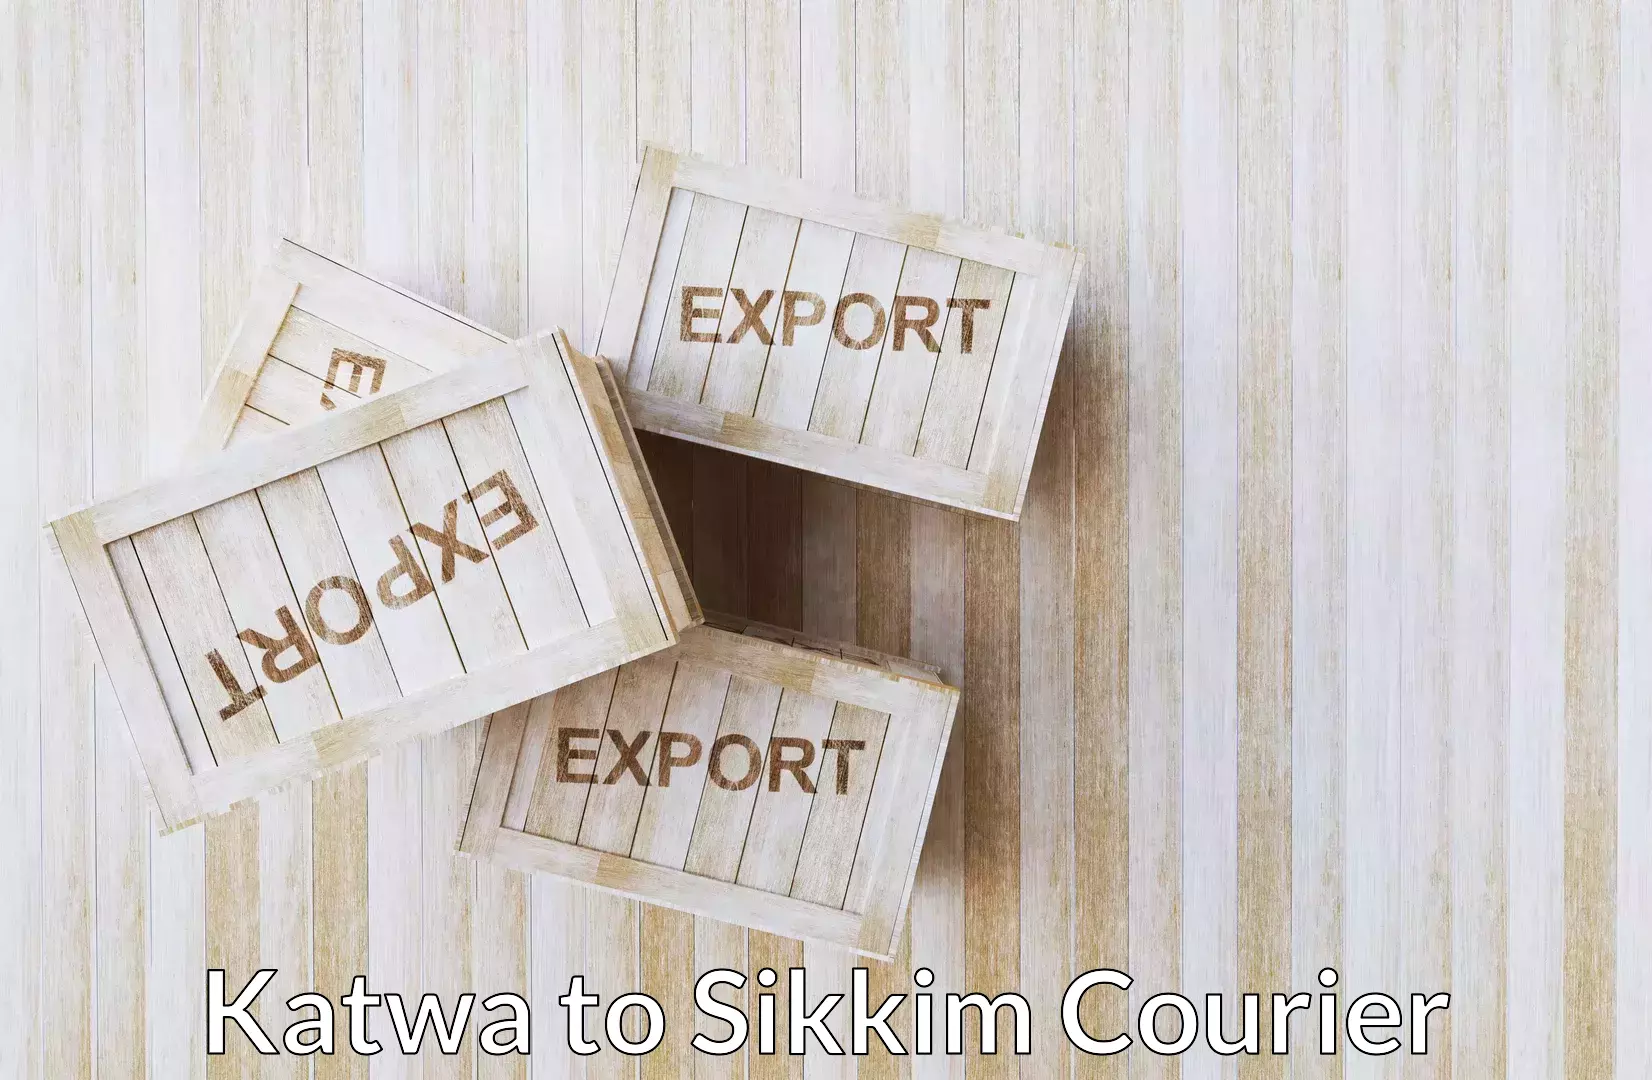 Luggage shipment specialists Katwa to East Sikkim